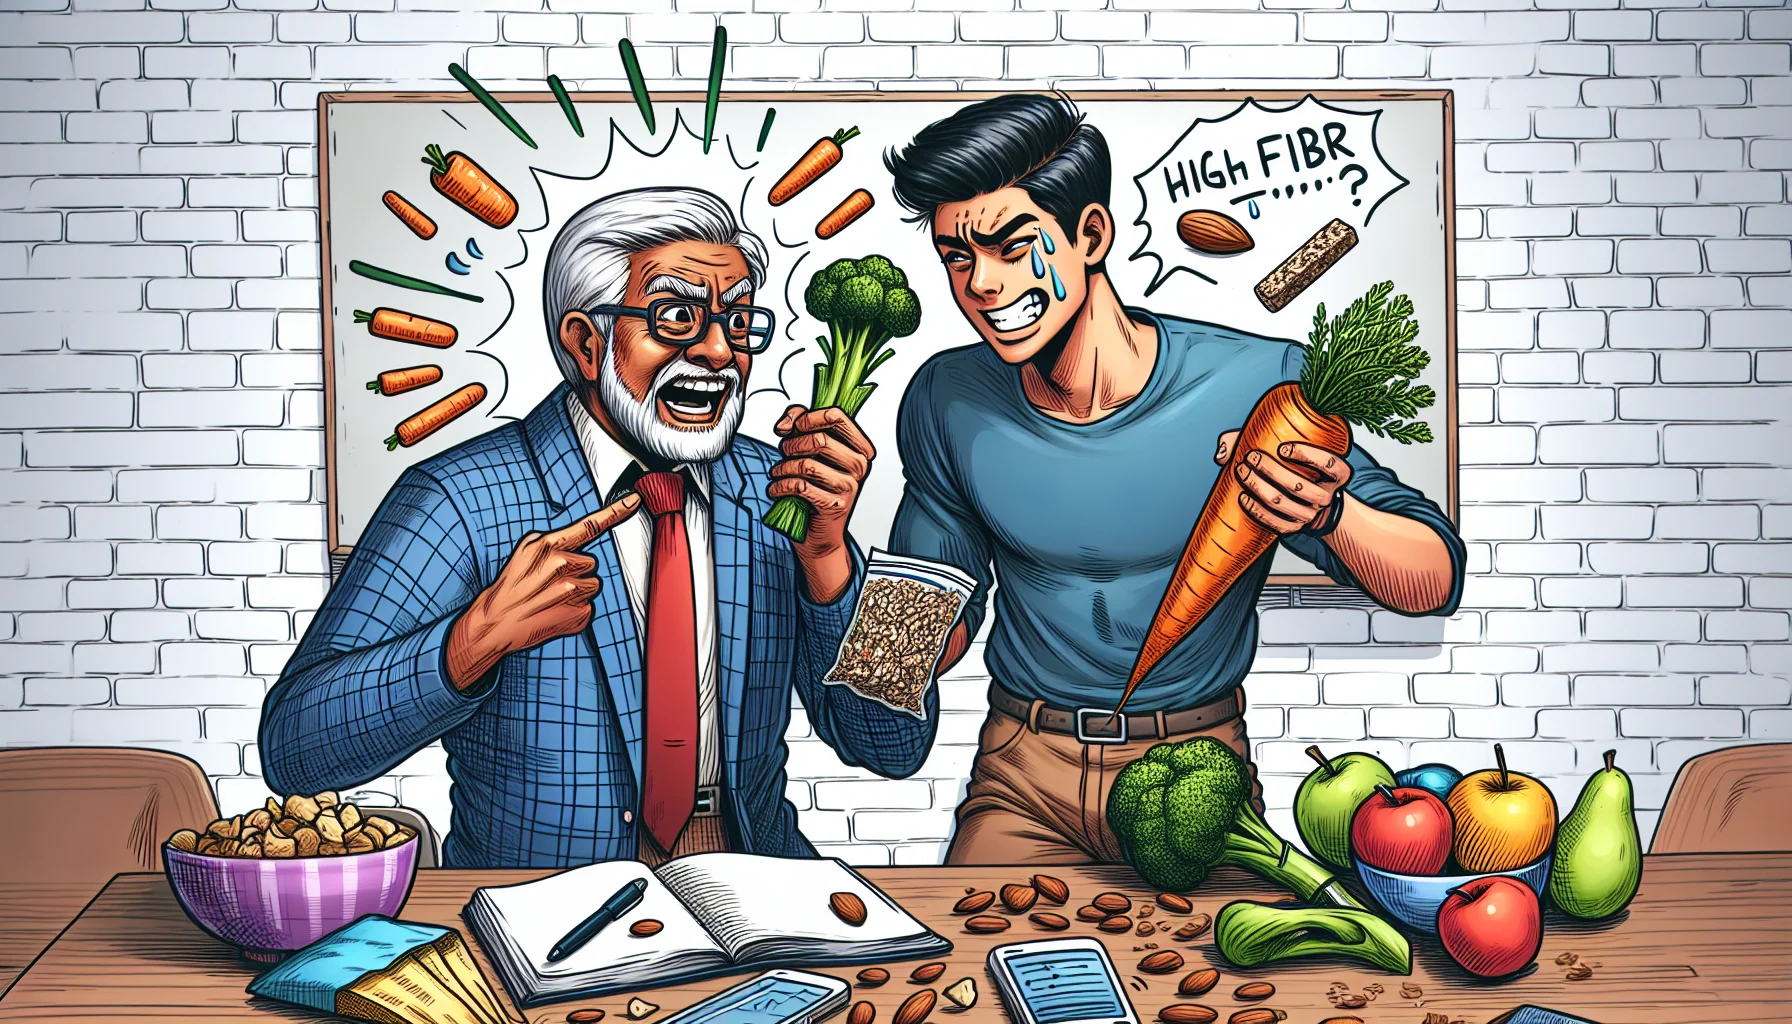 Draw a lighthearted and amusing picture featuring high fiber foods and snacks. Focus on a scene happening in a lively, multi-generational gathering where a South Asian grandfather is attempting to persuade a rebellious Caucasian teenager about the benefits of high fiber diets. The older man should be joyfully holding a bunch of carrots and broccoli, while the young man amusingly tries to hide a packet of chips behind his back. Add some details like a fruit bowl on the table, high fiber snacks like granola bars and almonds scattered, symbolizing the humor in advocating healthy eating habits.